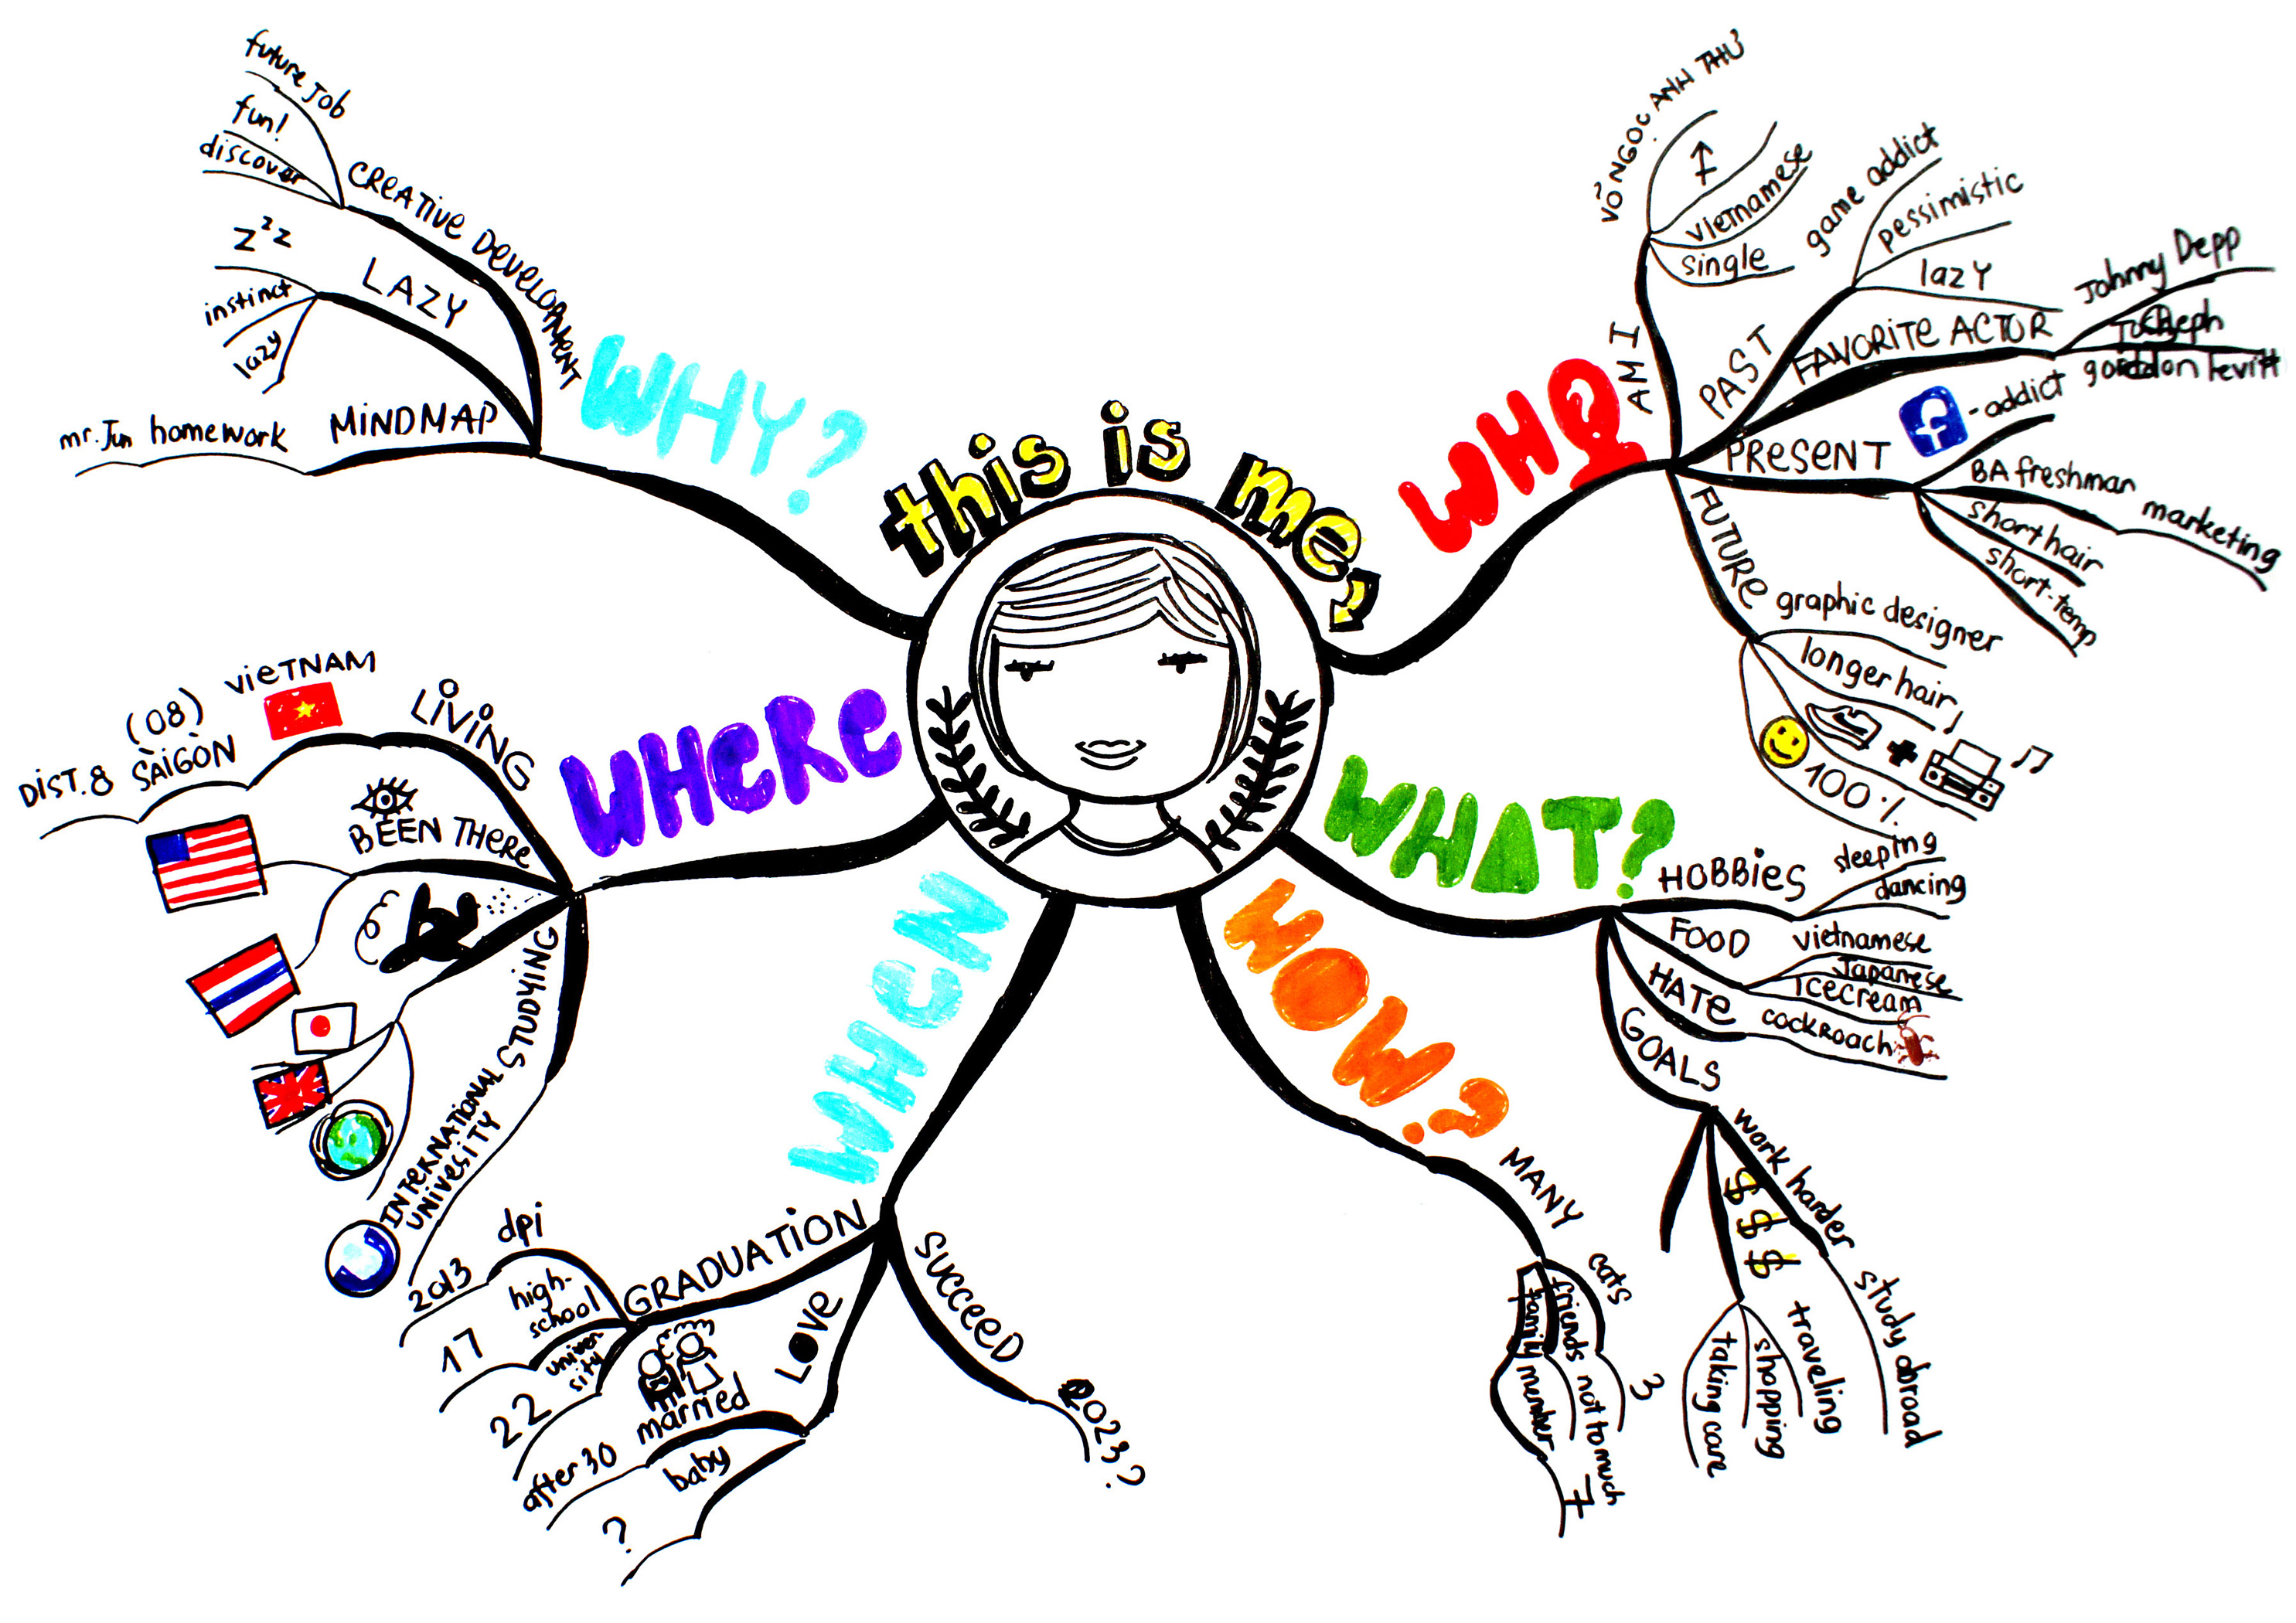 A mind map illustrating a use for the 5W1H method. 